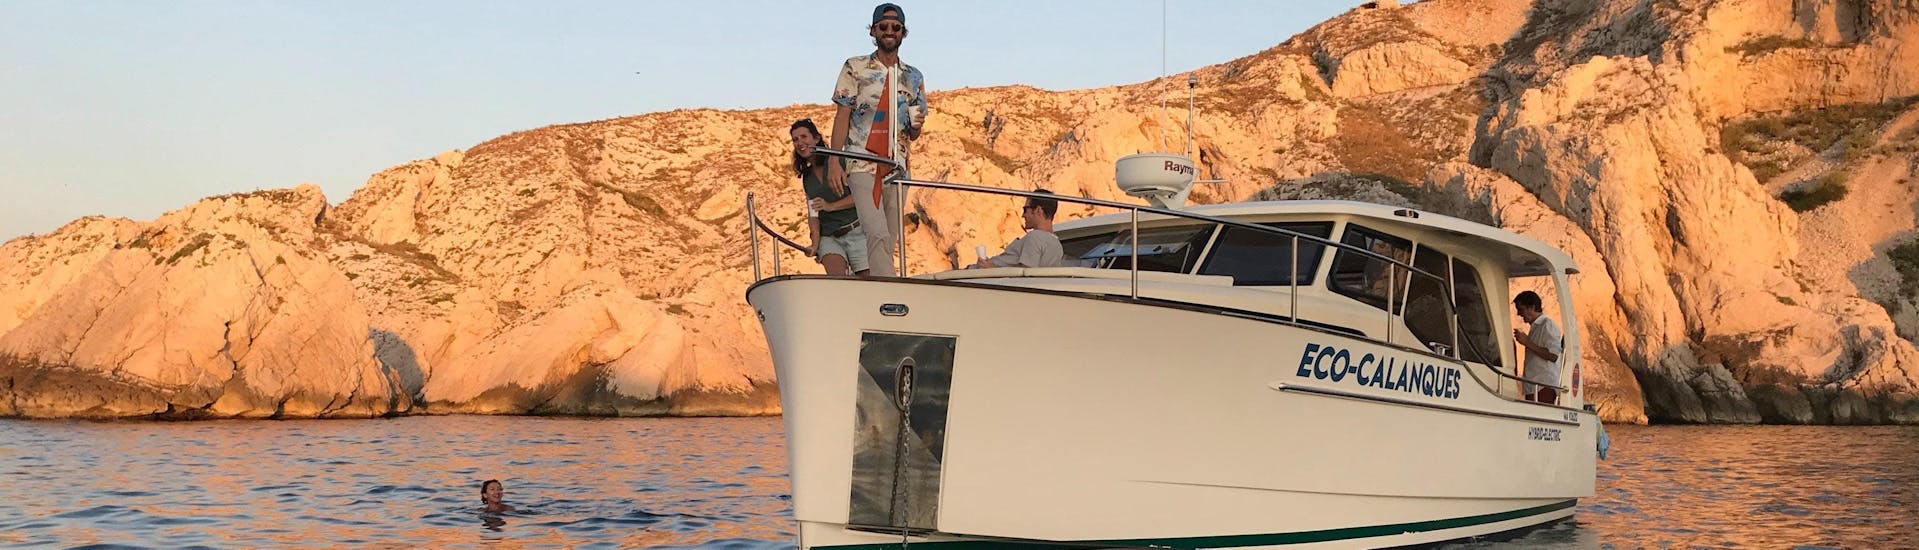 Private Boat Trip to Frioul Archipelago at Sunset from Eco Calanques Marseille.